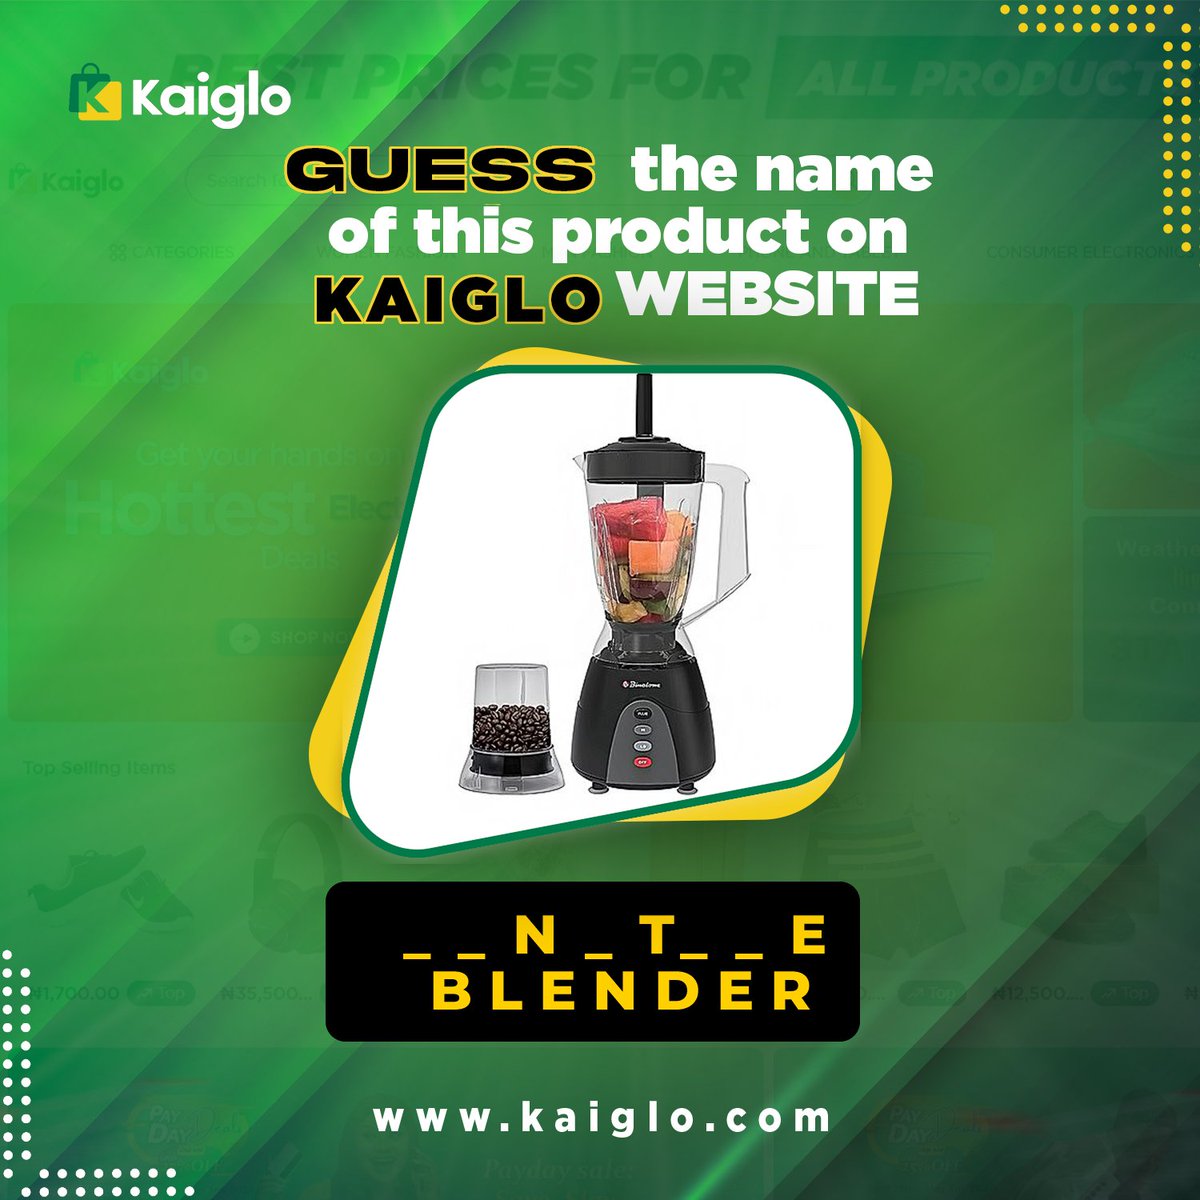 How familiar are you with the Kaiglo website? Guess correctly and win a gift😍
#guesstheword #tbt #kaiglofficial #shopping #feebies